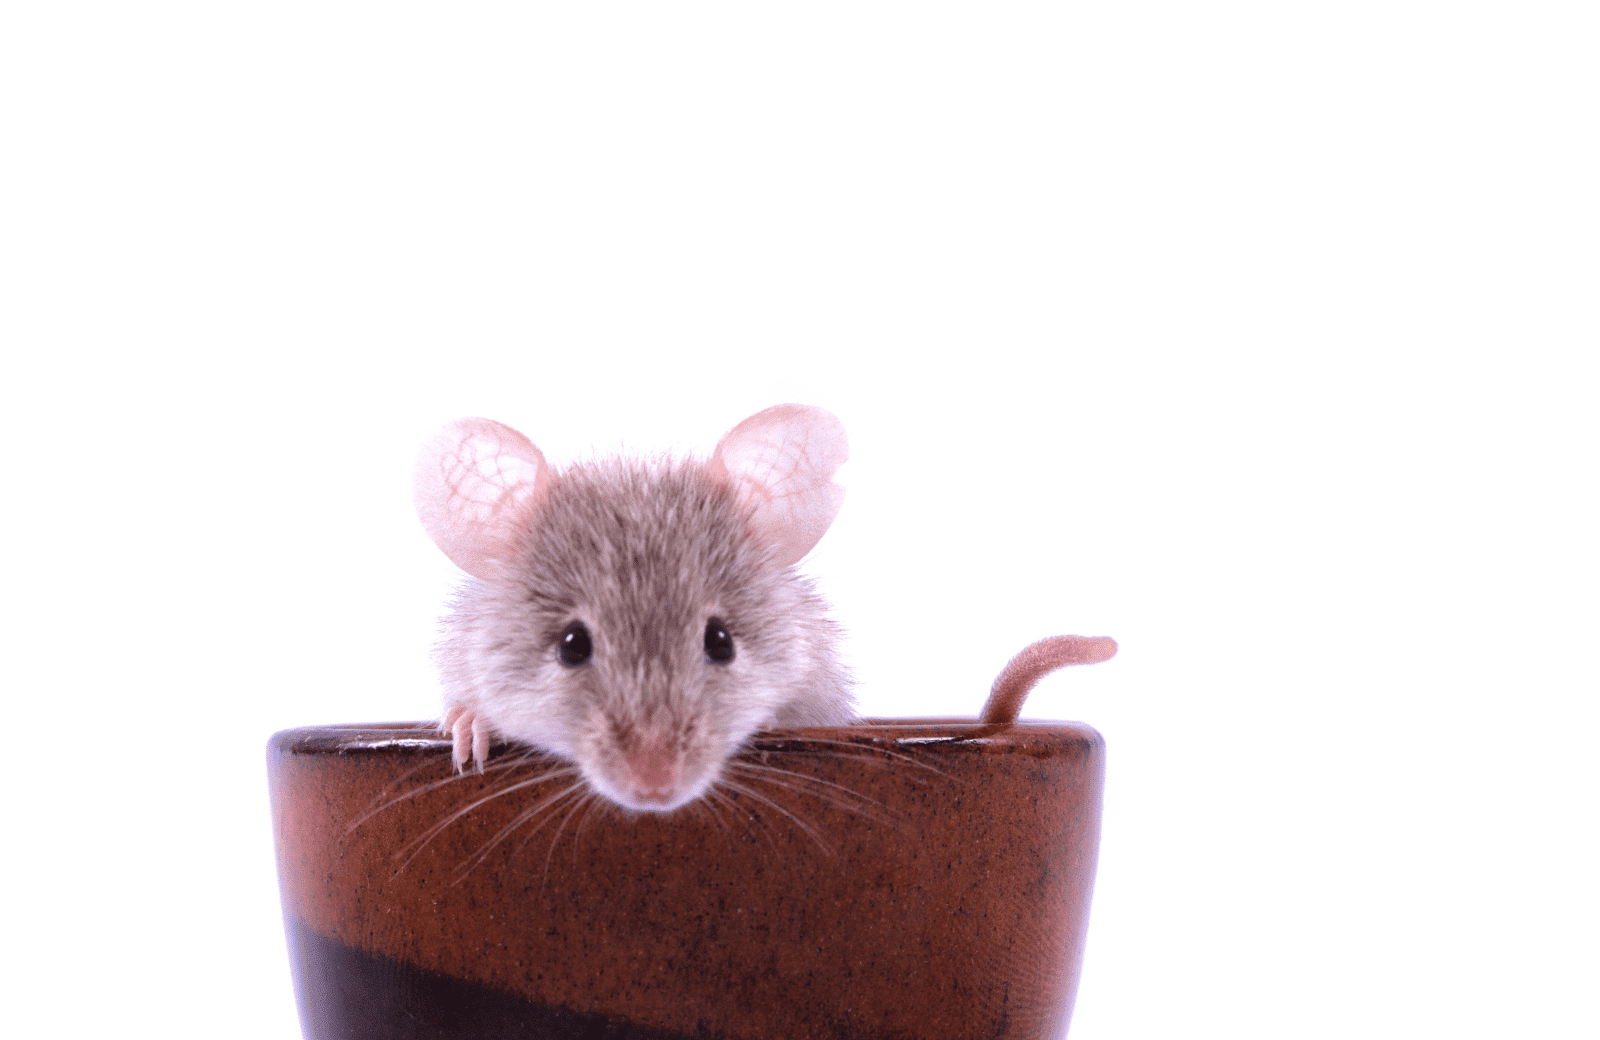 Try This Easy Trick to Stop Mice from Entering Your Home